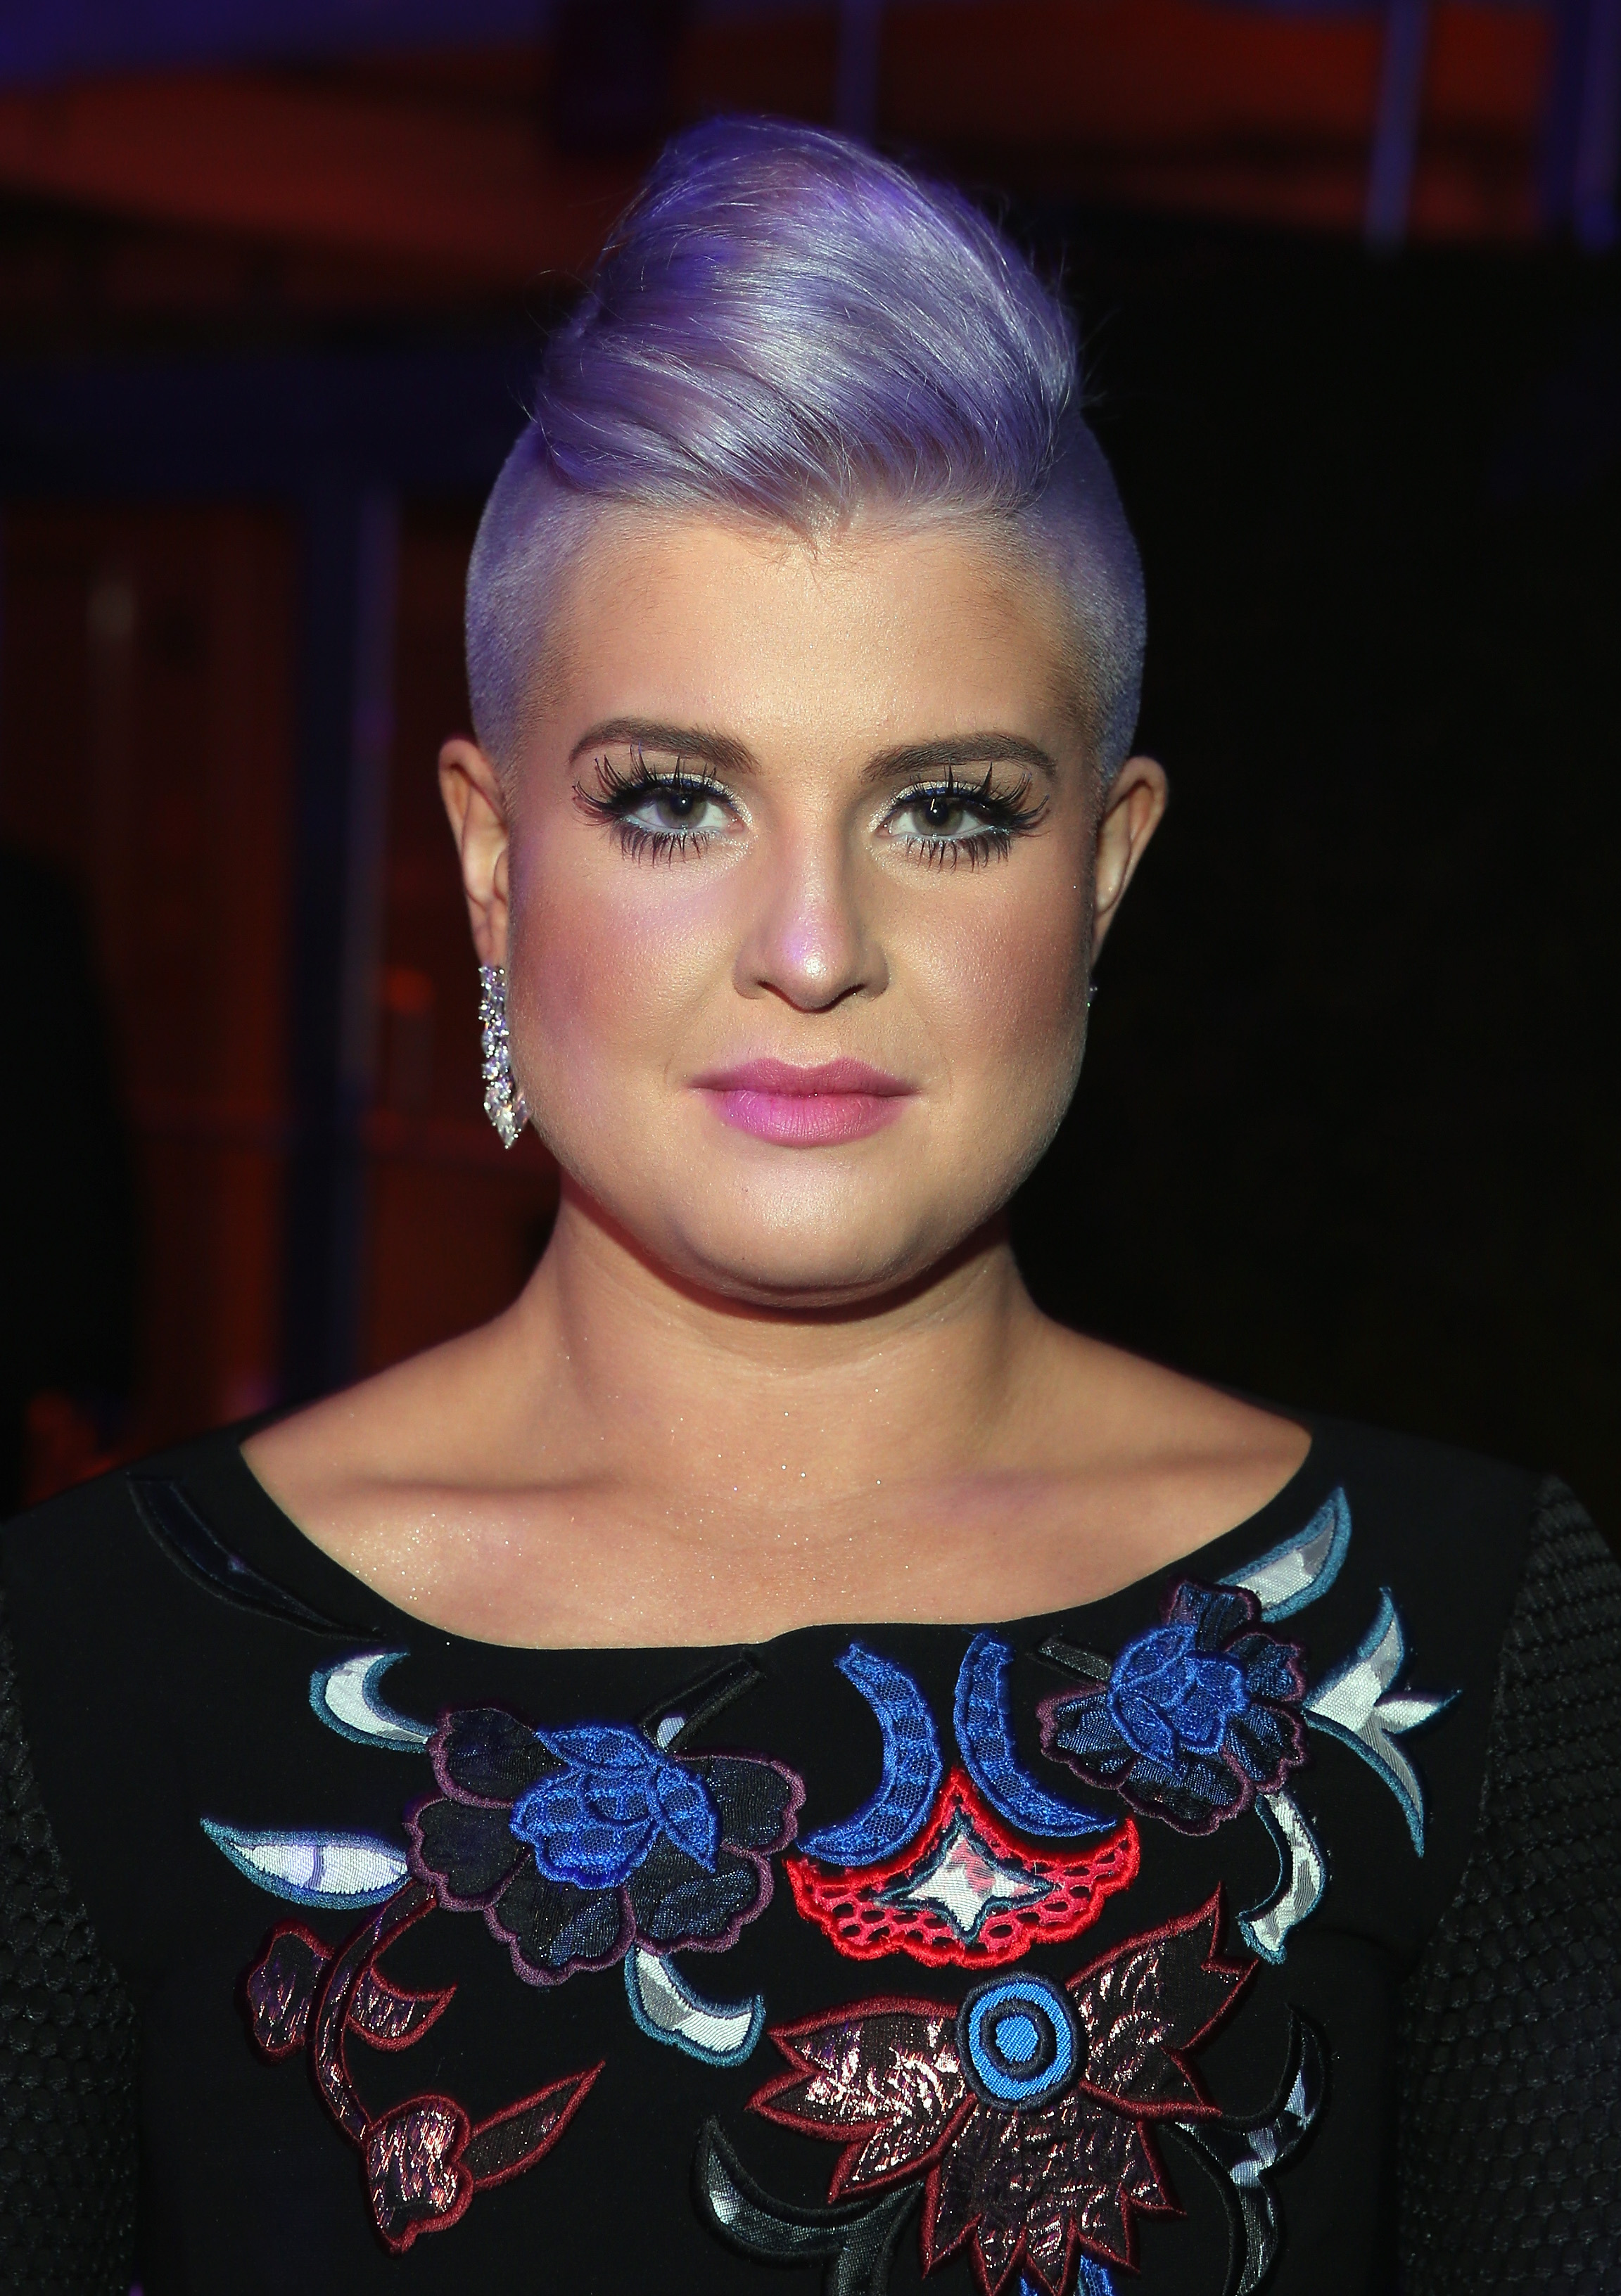 Kelly Osbourne at the 23rd Annual Elton John AIDS Foundation Academy Awards Viewing Party on February 22, 2015 in Los Angeles, California. (Jonathan Leibson&mdash;2015 Getty Images)